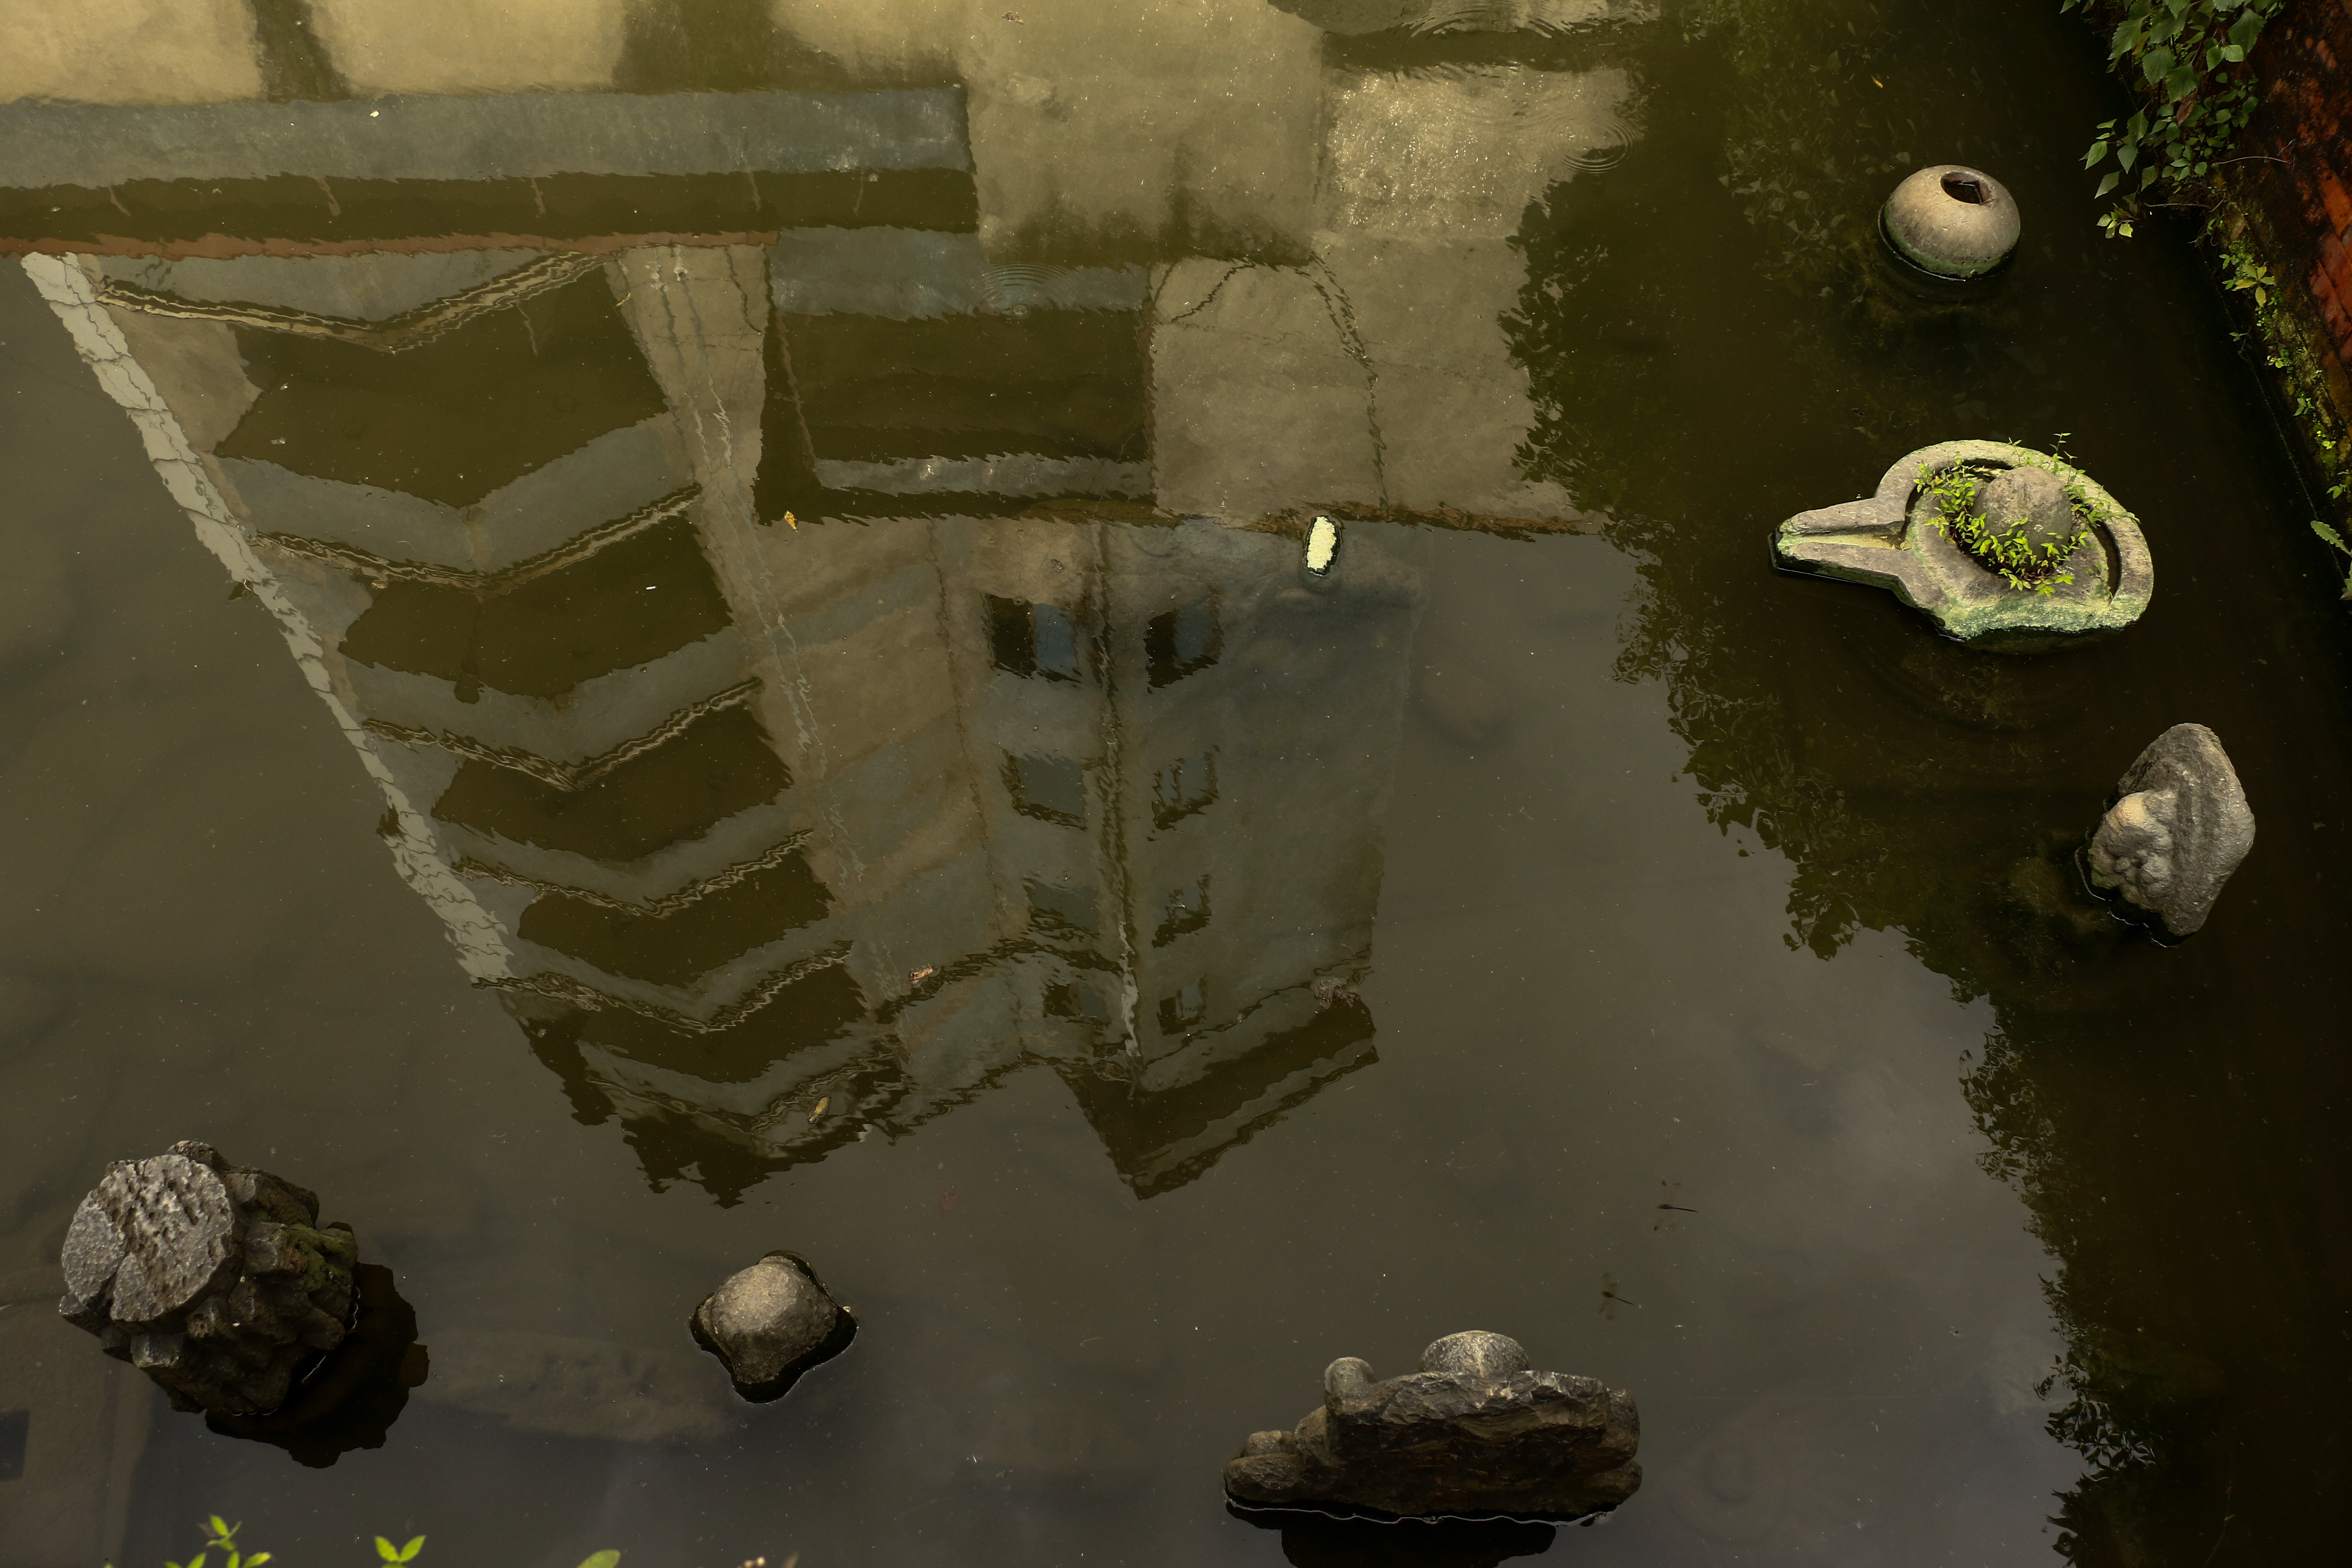 A building reflected in the water at desolated Yangal Hiti. Locals say the hiti dried up after the construction of the building.